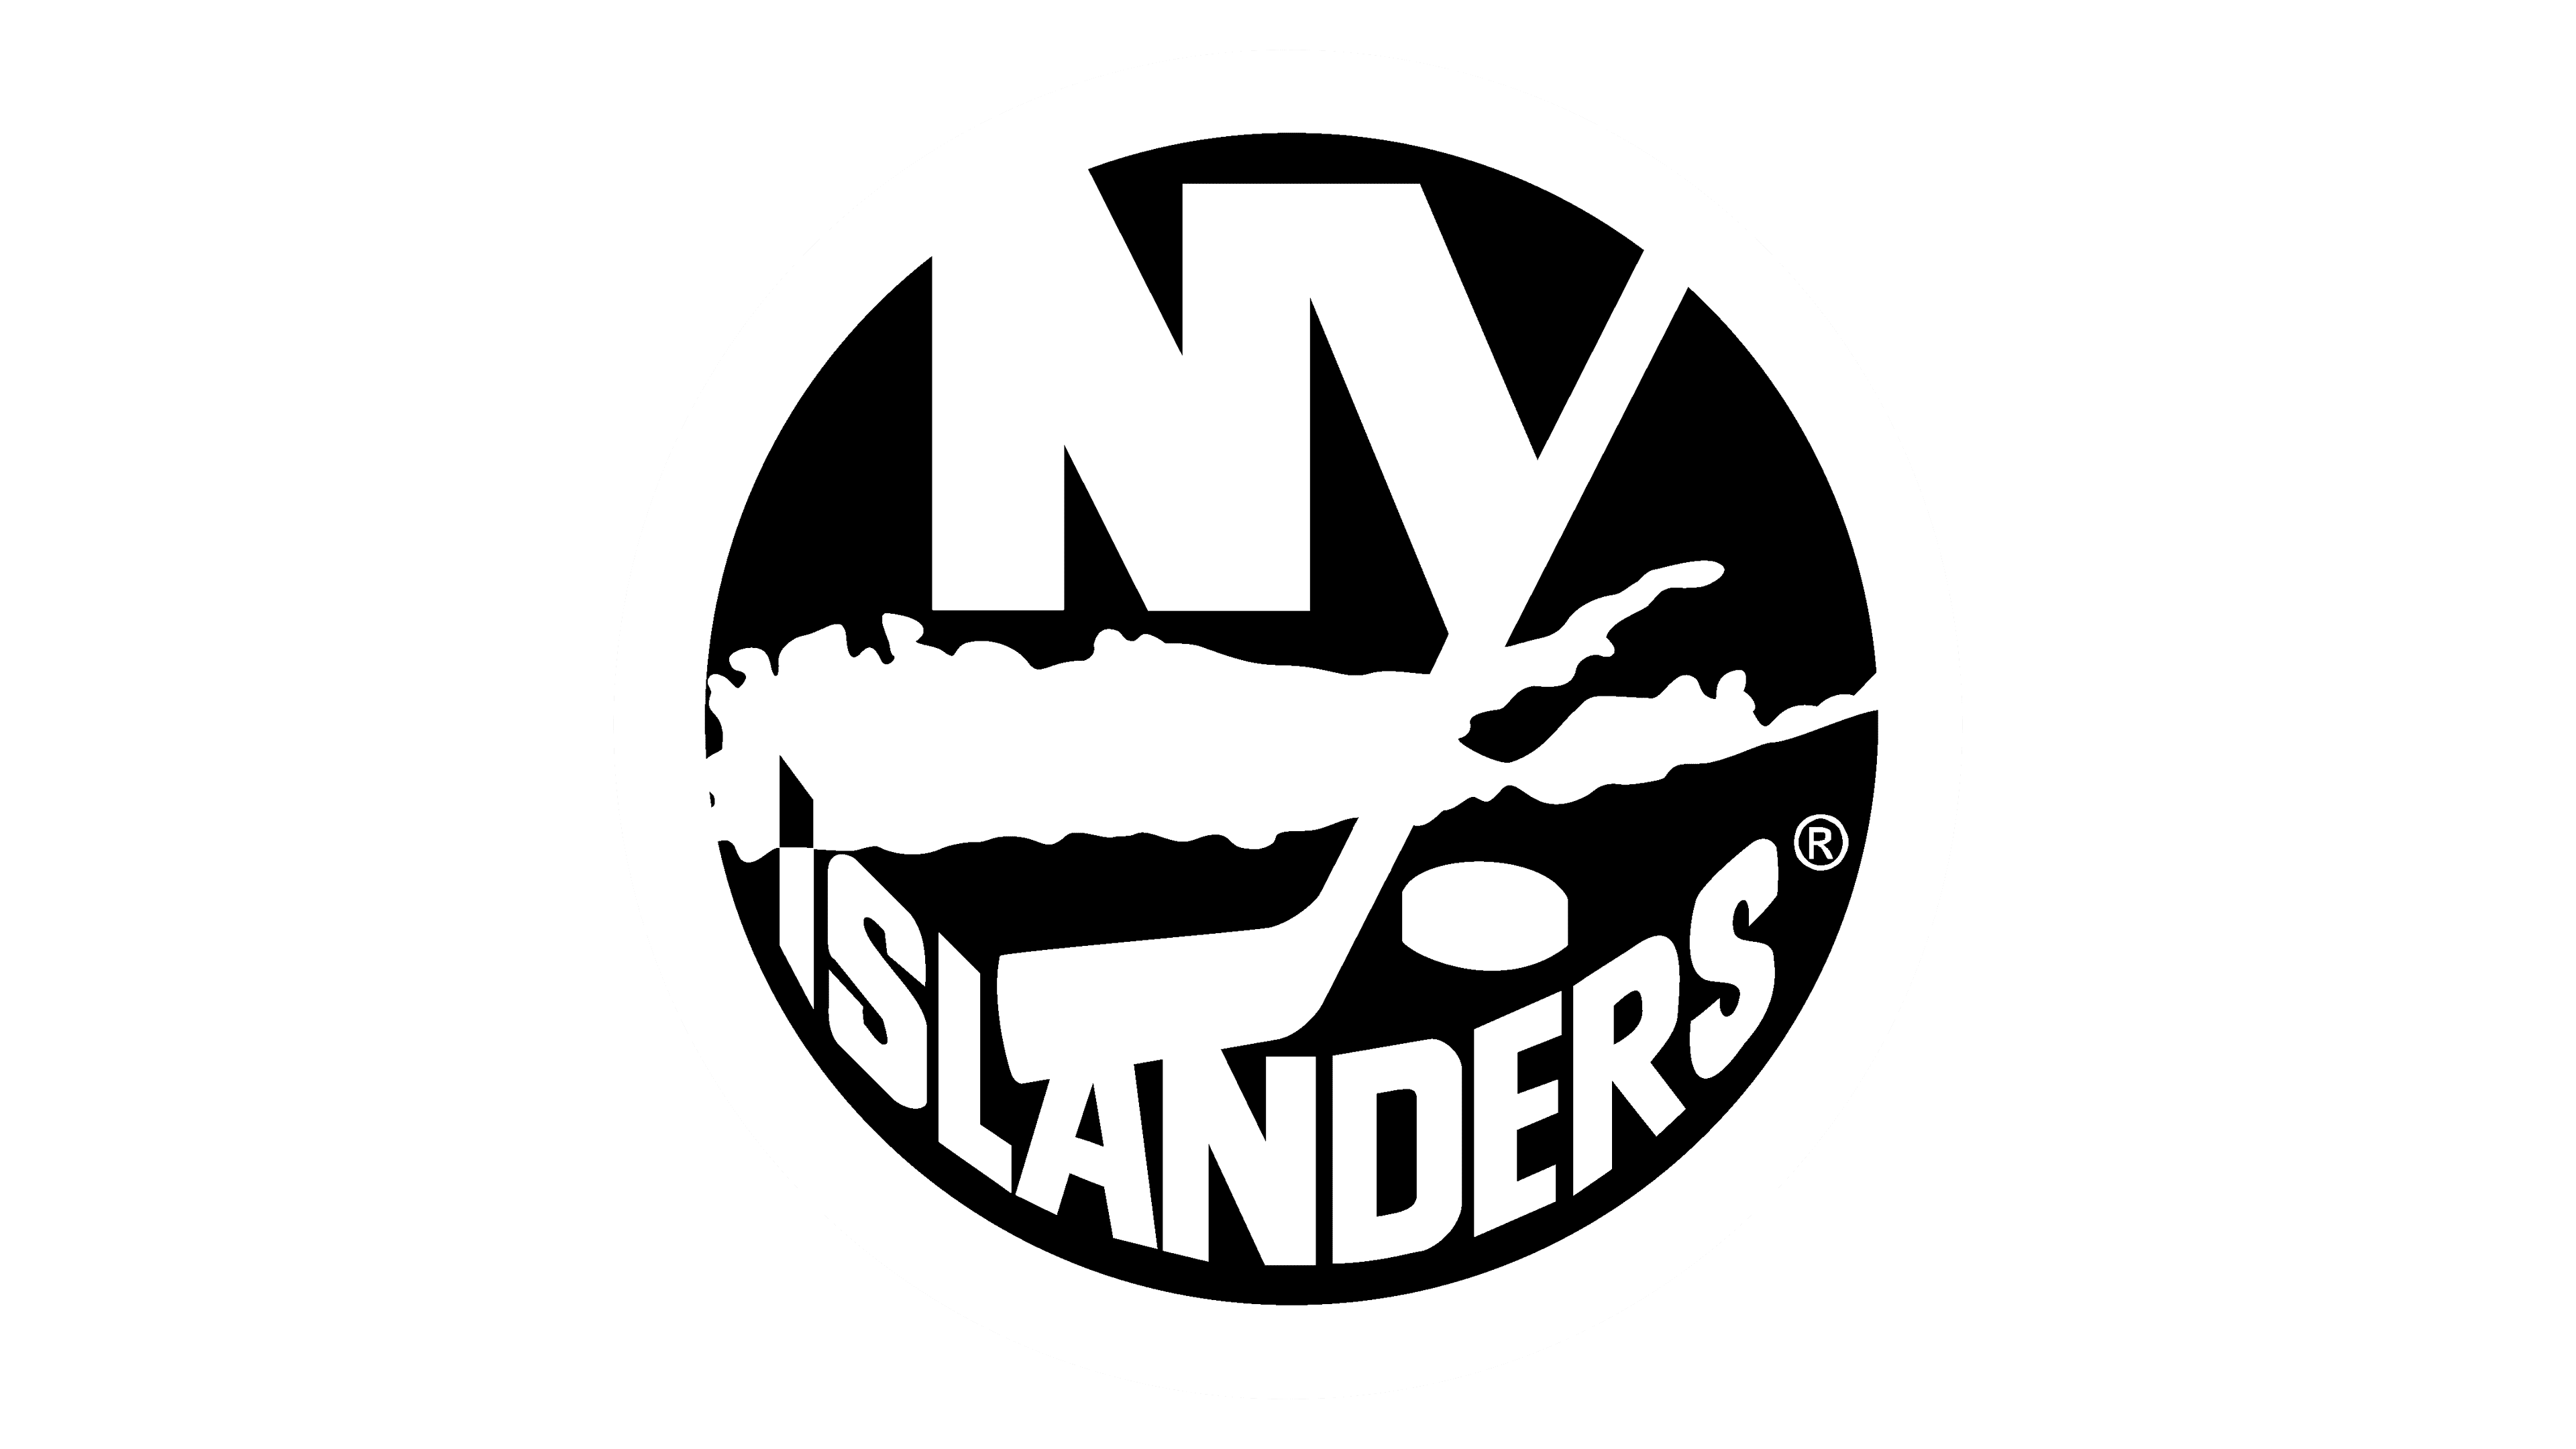 New York Islanders Logo and symbol, meaning, history, PNG, brand